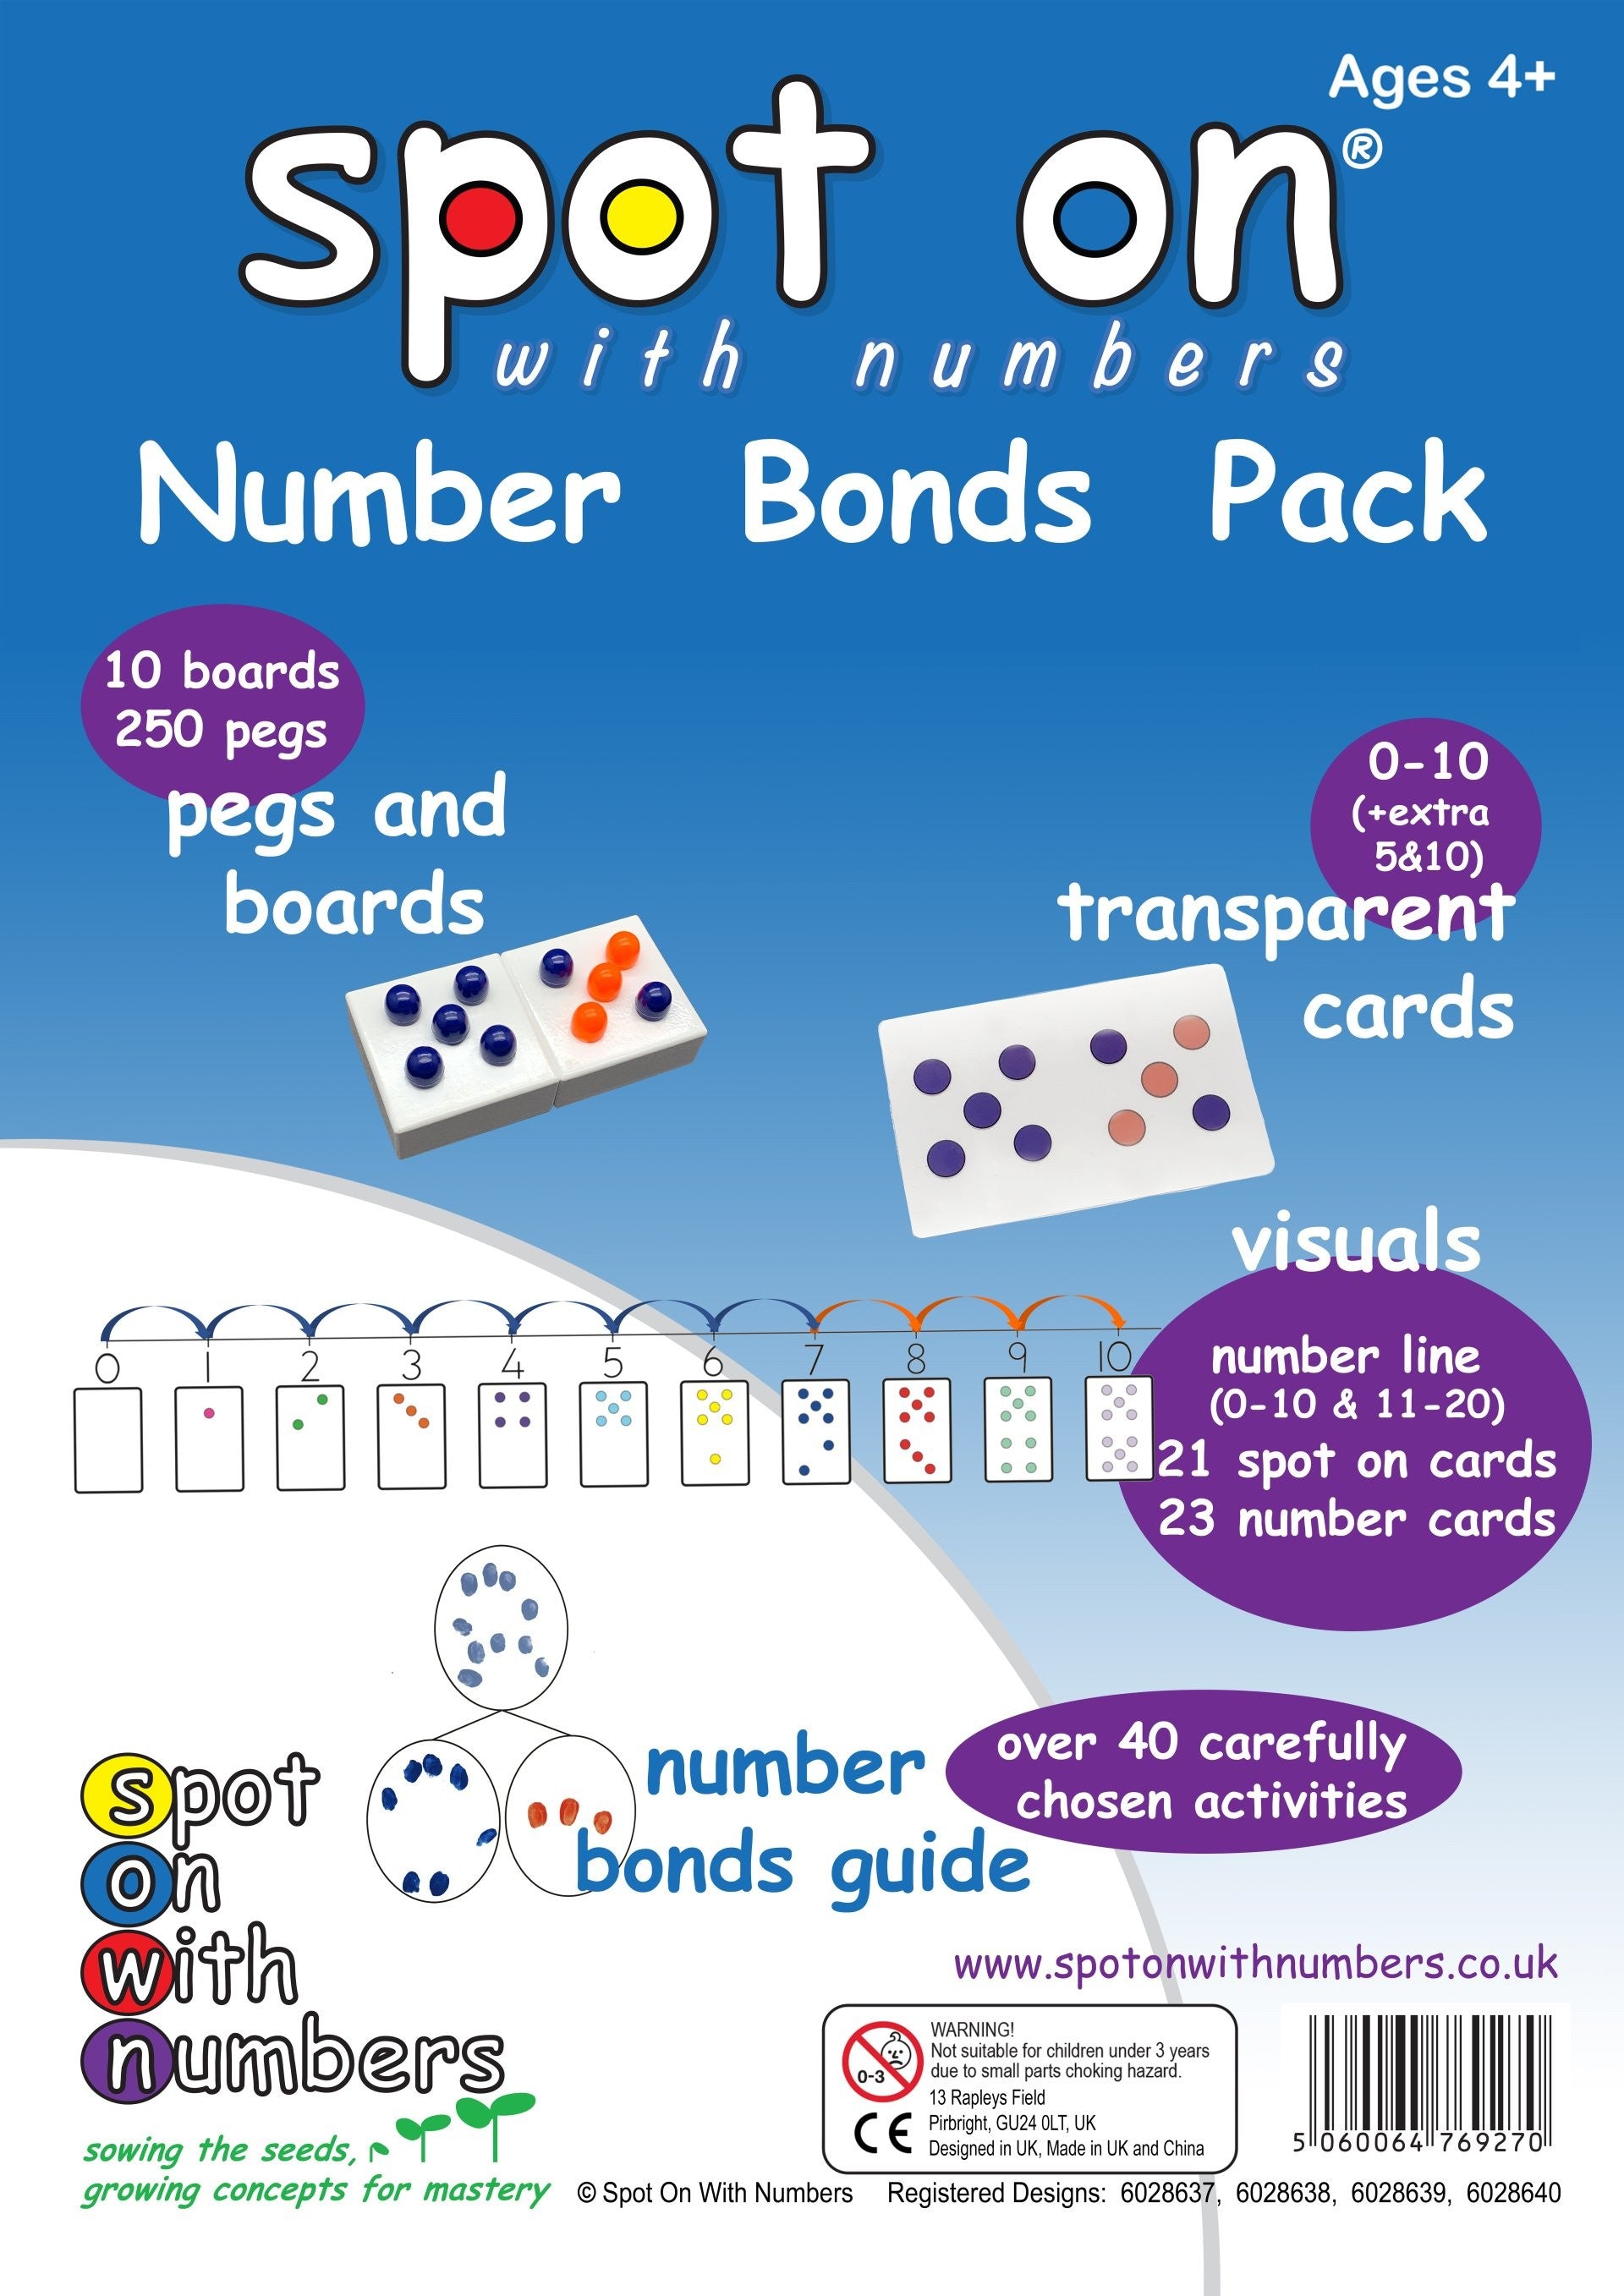 Spot on with Numbers - Pegs and Boards Pack